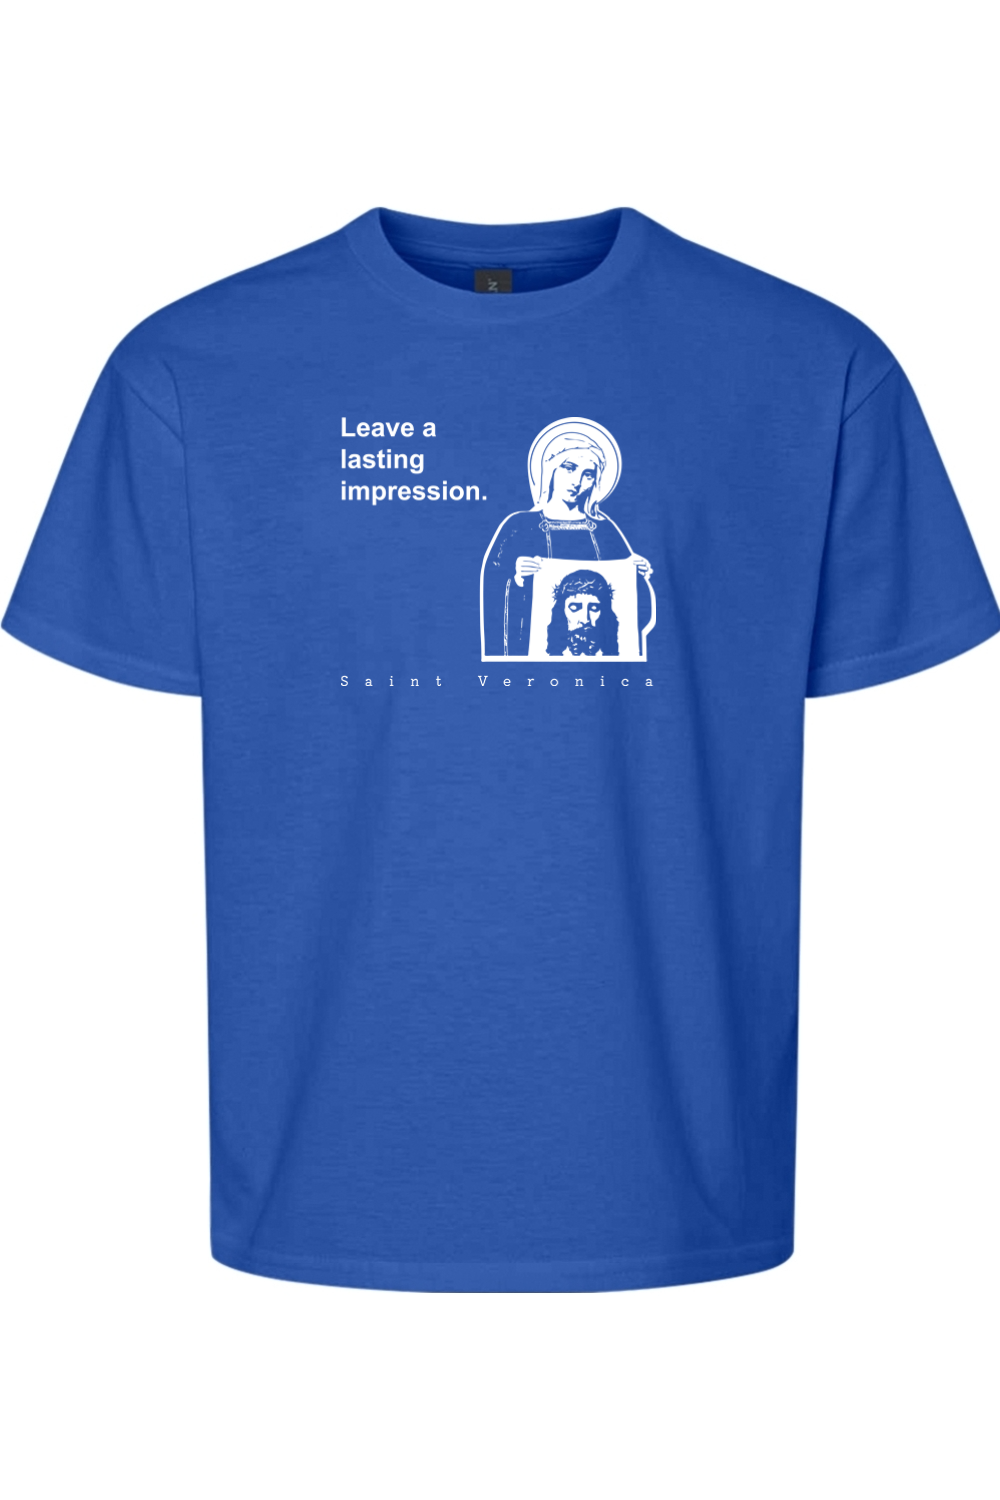 Leave a Lasting Impression - St Veronica Youth T-Shirt